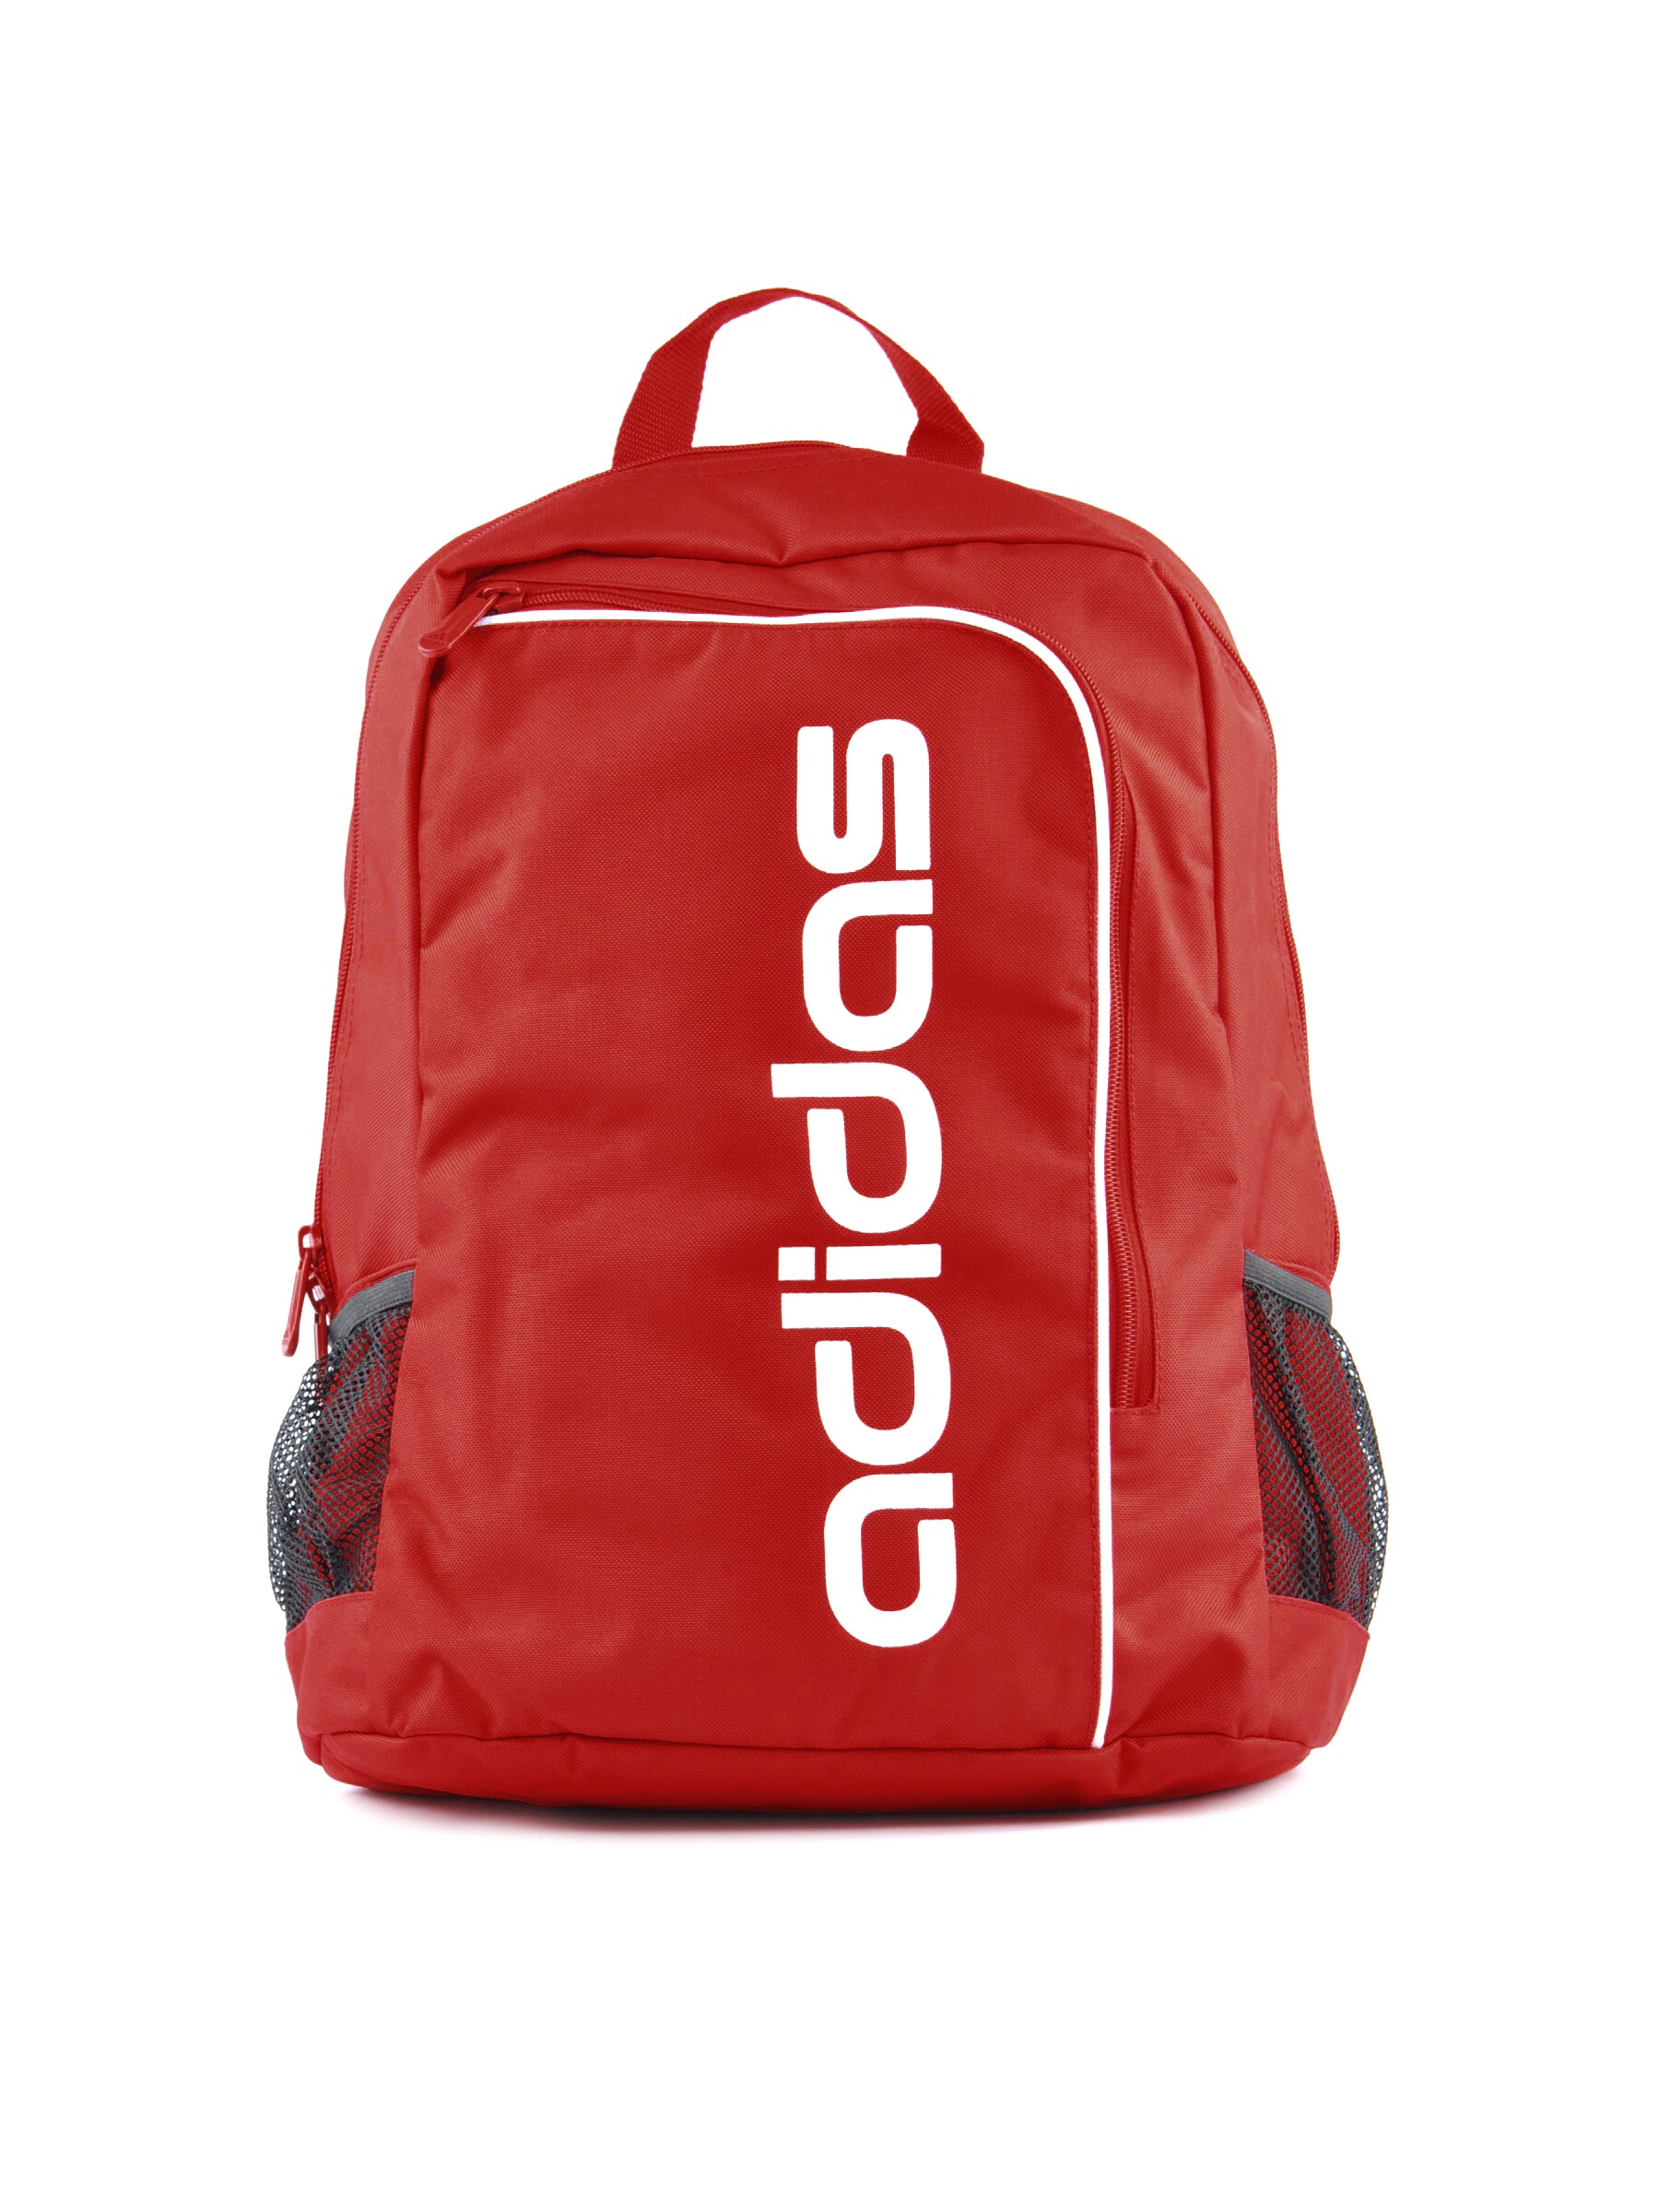 ADIDAS Unisex ADP1810 Red Backpack